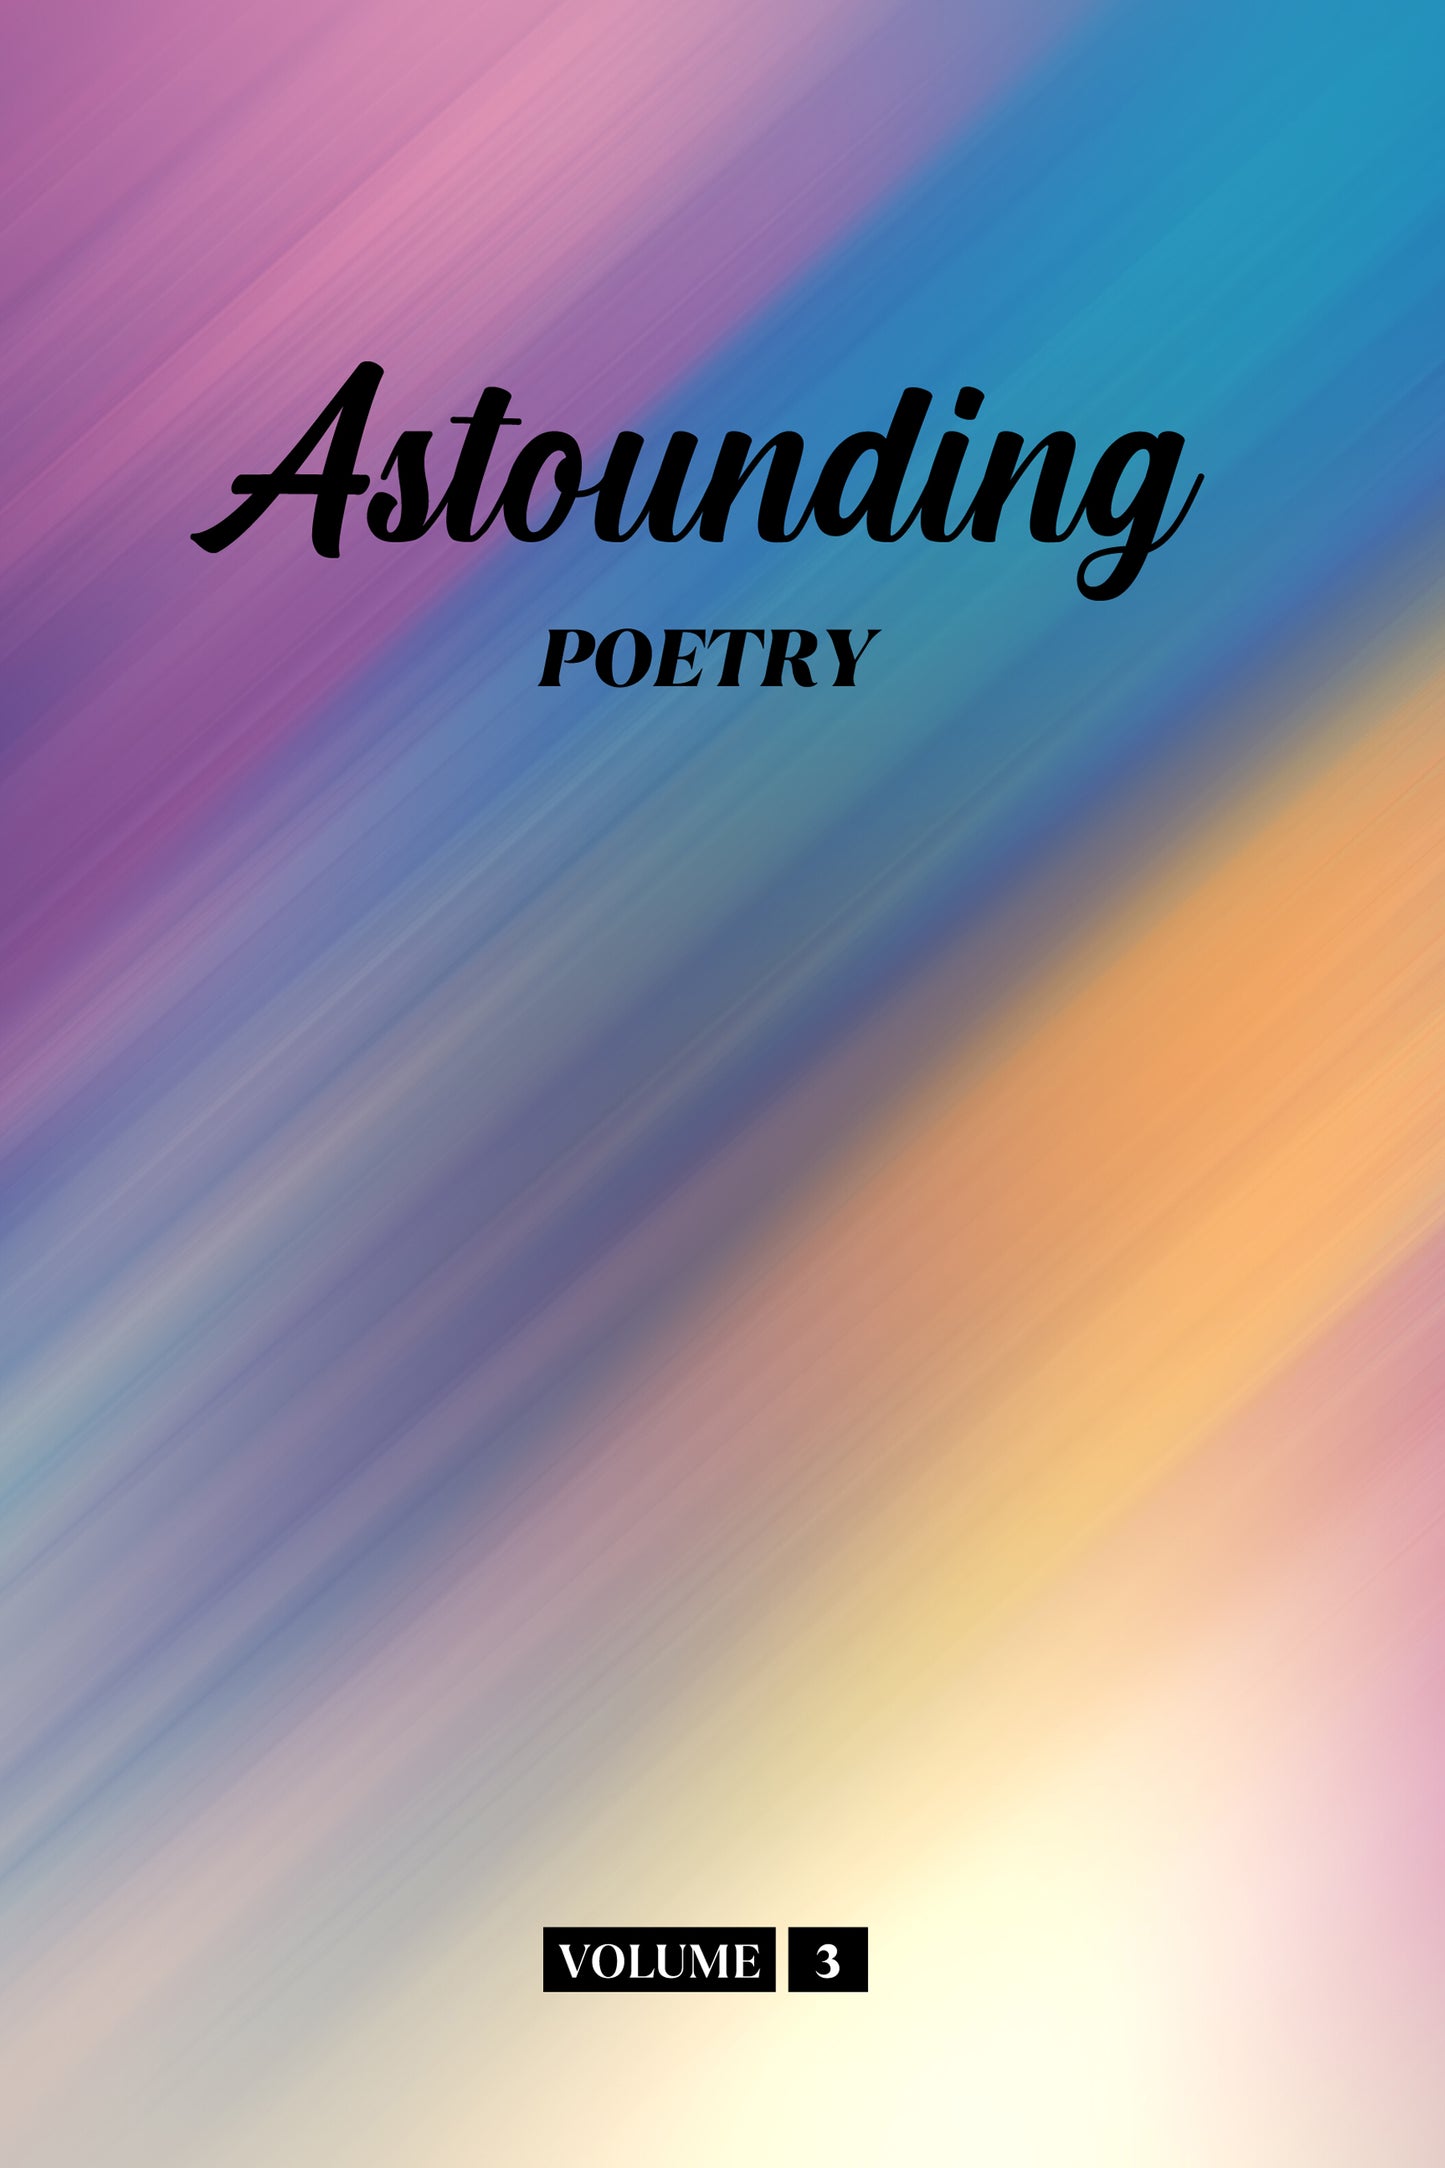 Astounding Poetry (Volume 3) - Physical Book